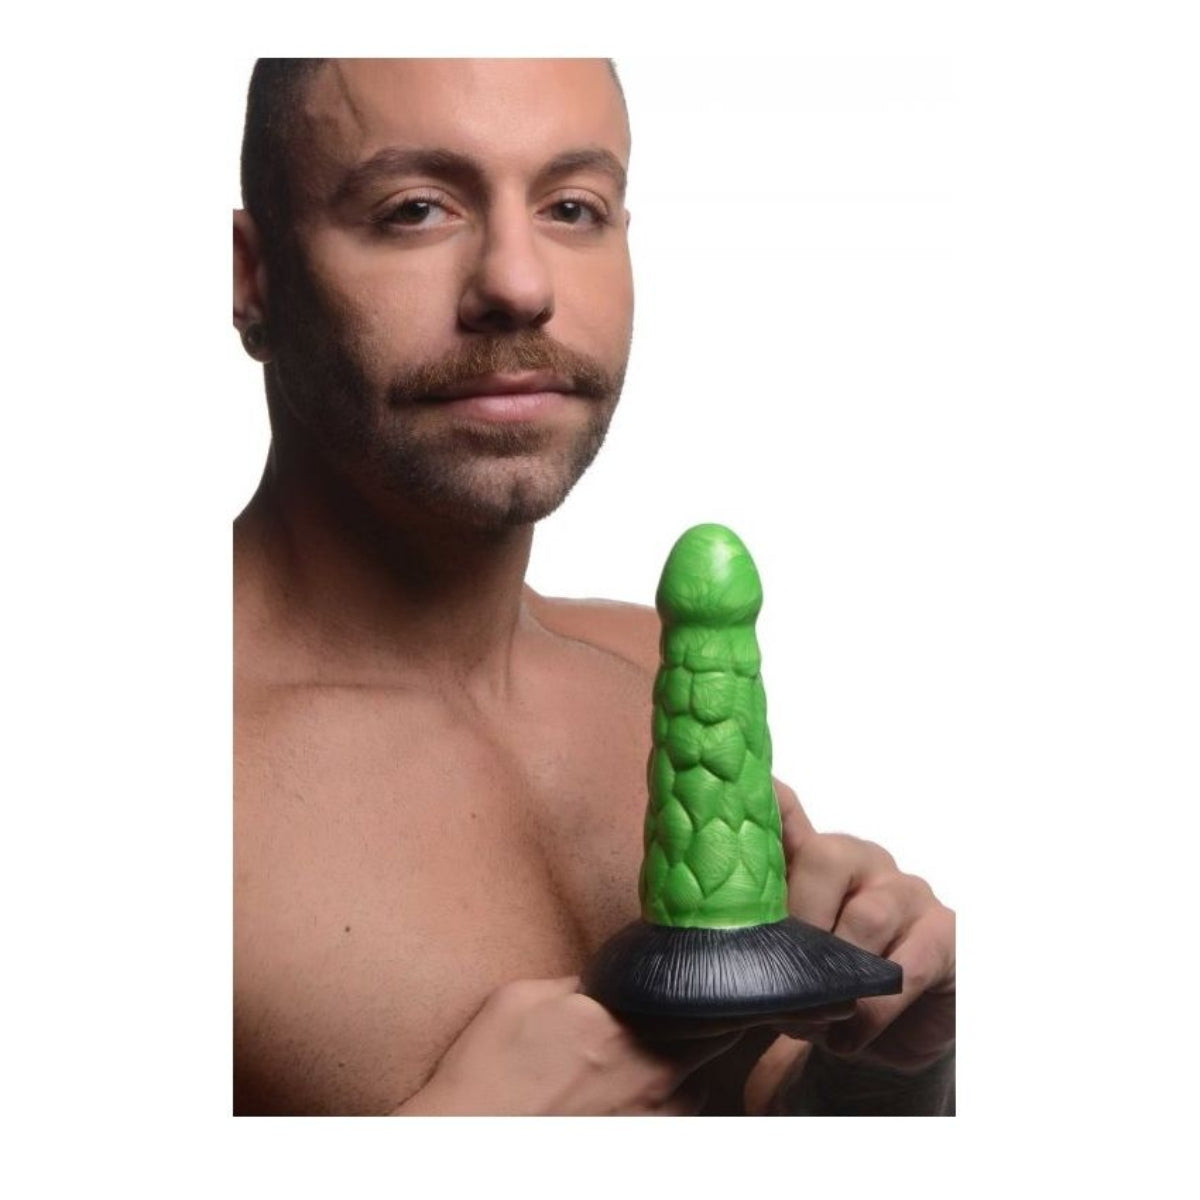 Male Model Holding Product -Creature Cocks Radioactive Reptile Thick Scaly Silicone Dildo Green - Simply Pleasure